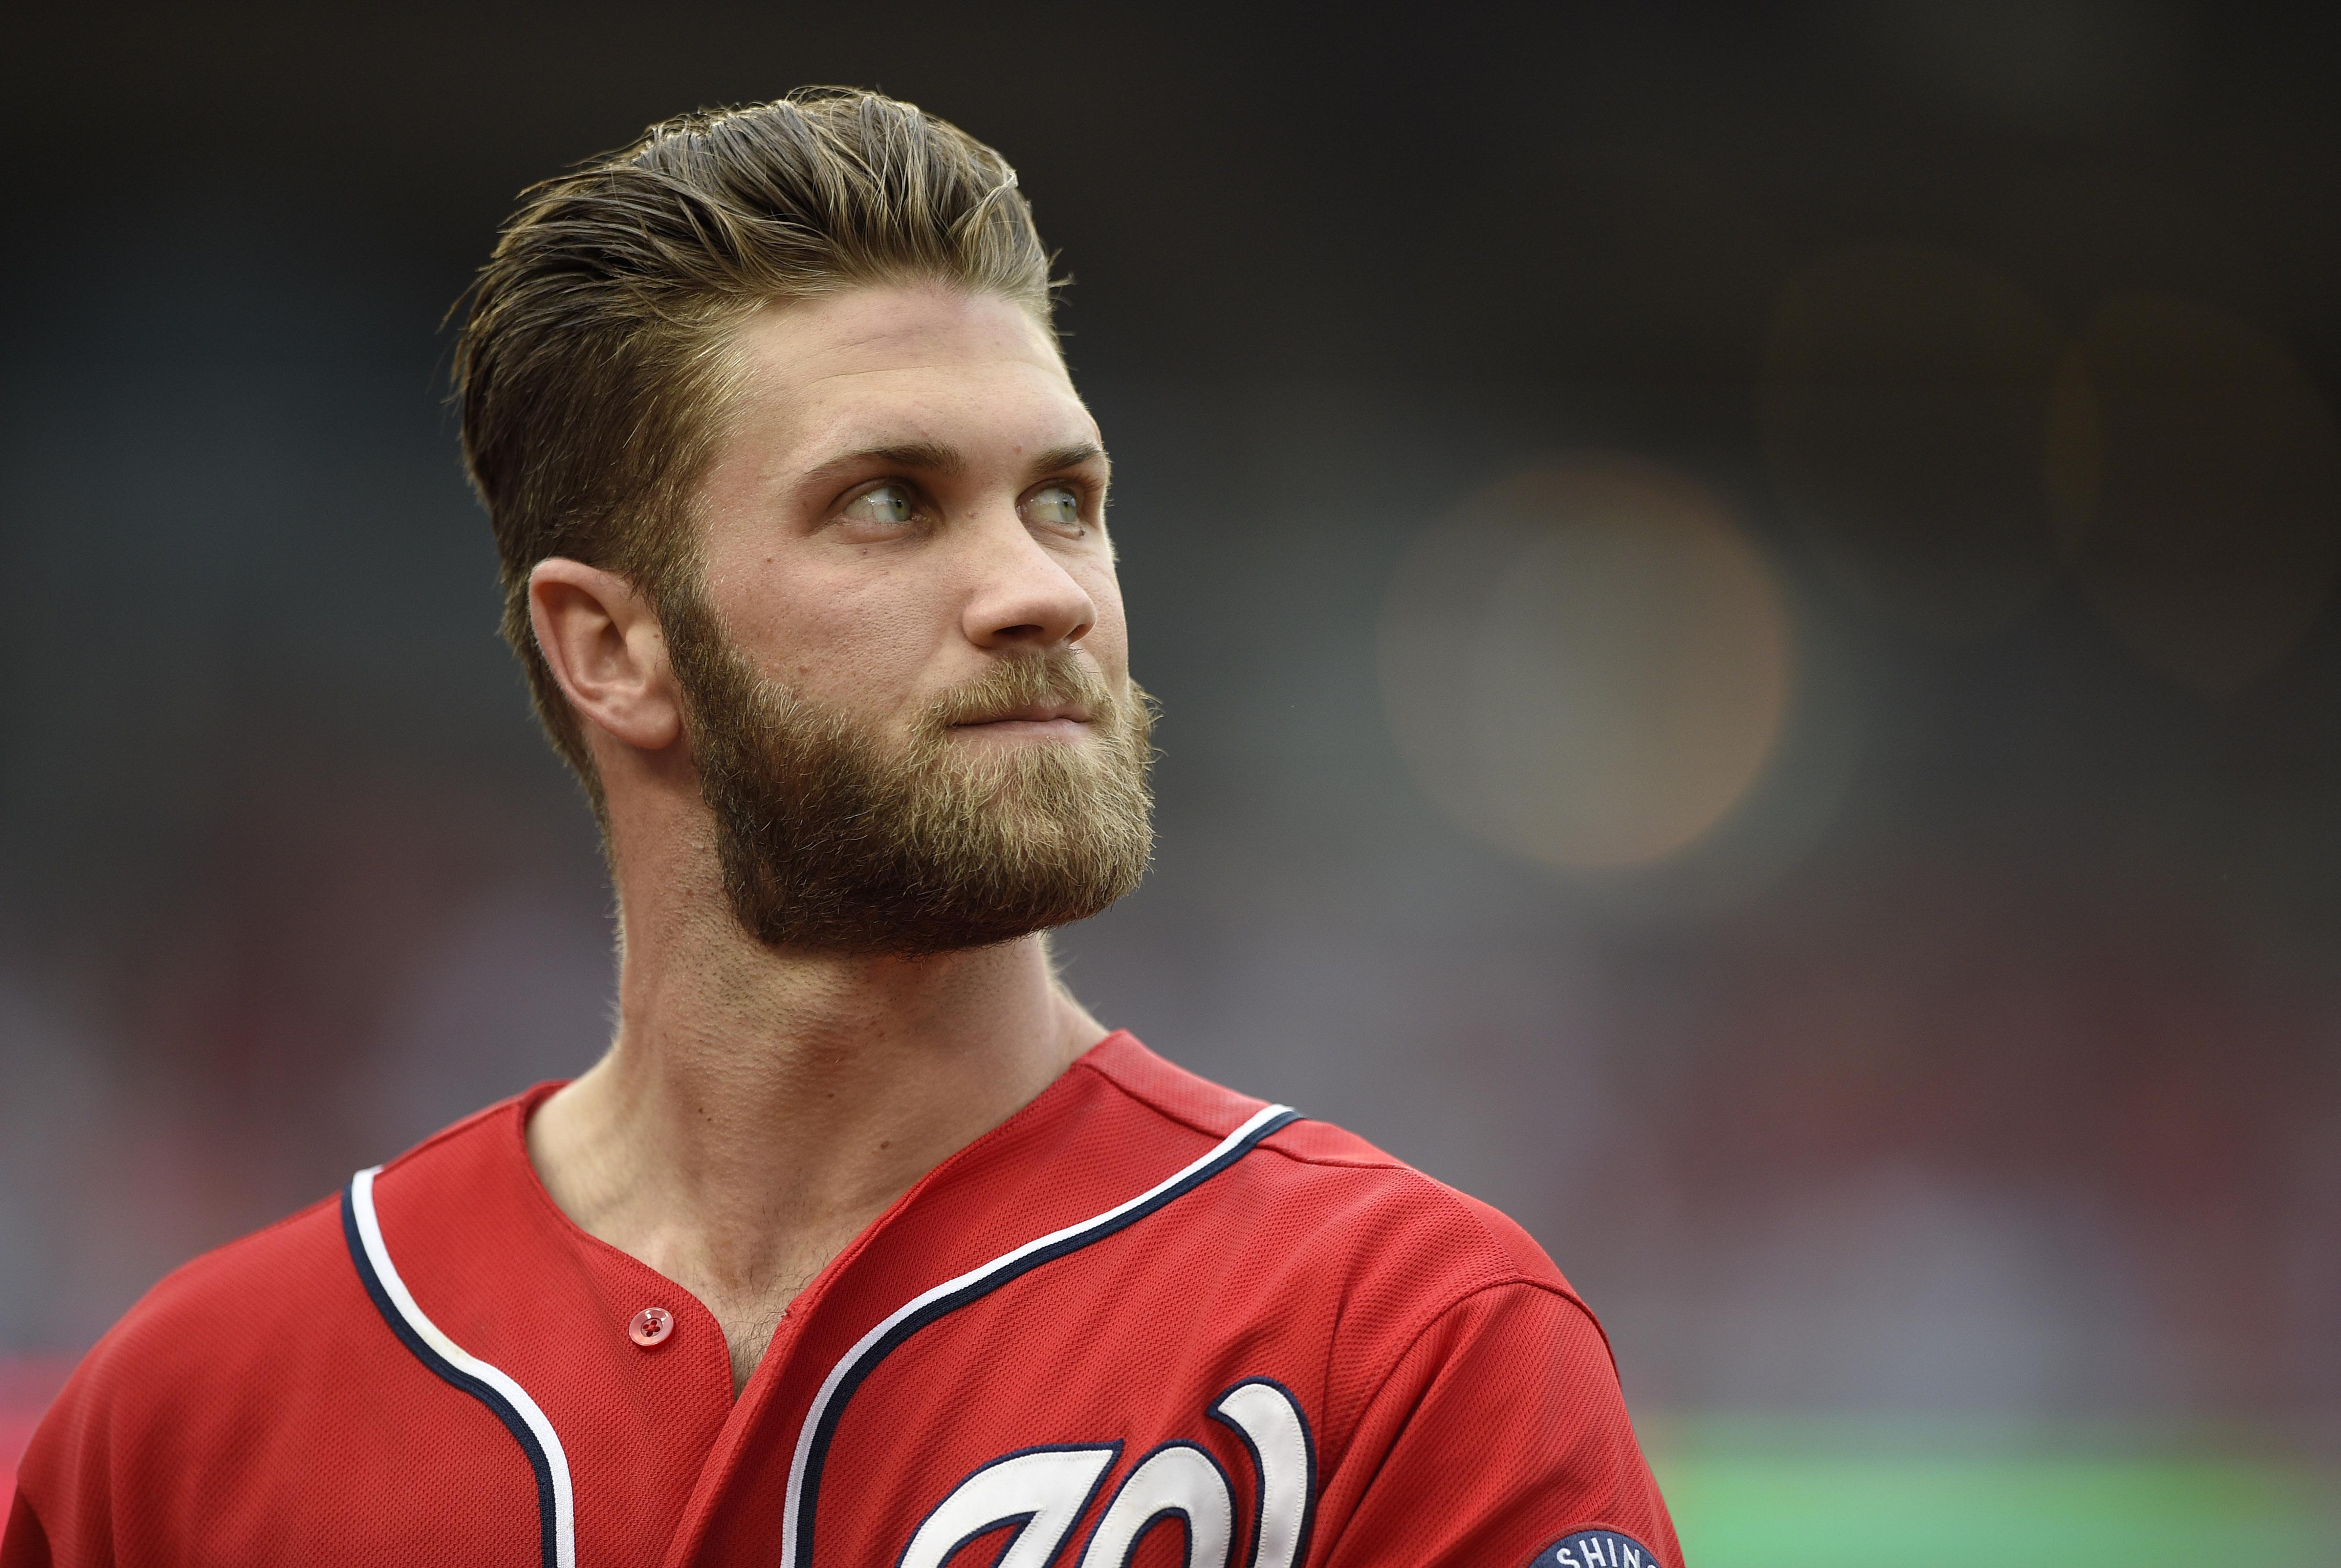 Bryce Harper Is Most Overrated, Say His Baseball Peers